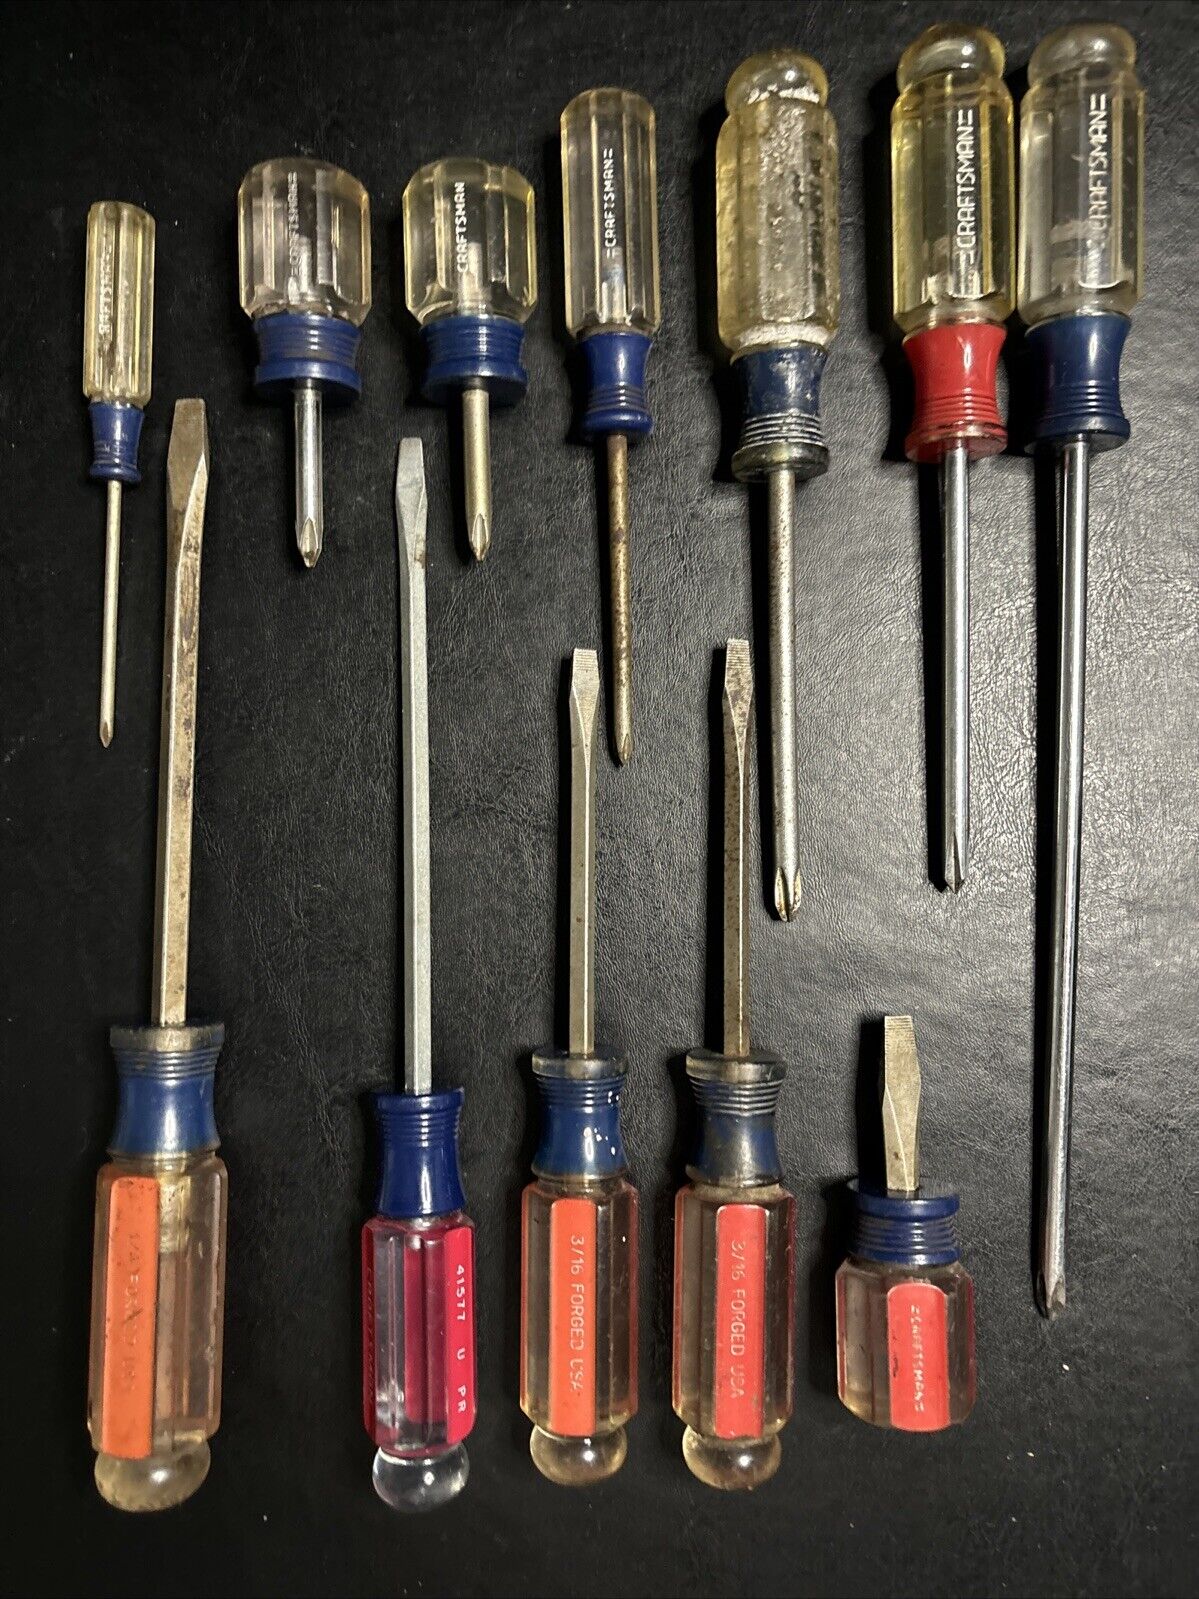 Lot of Vintage Assorted Craftsman Screwdrivers - Made in USA 5 Flat & 7 Philips